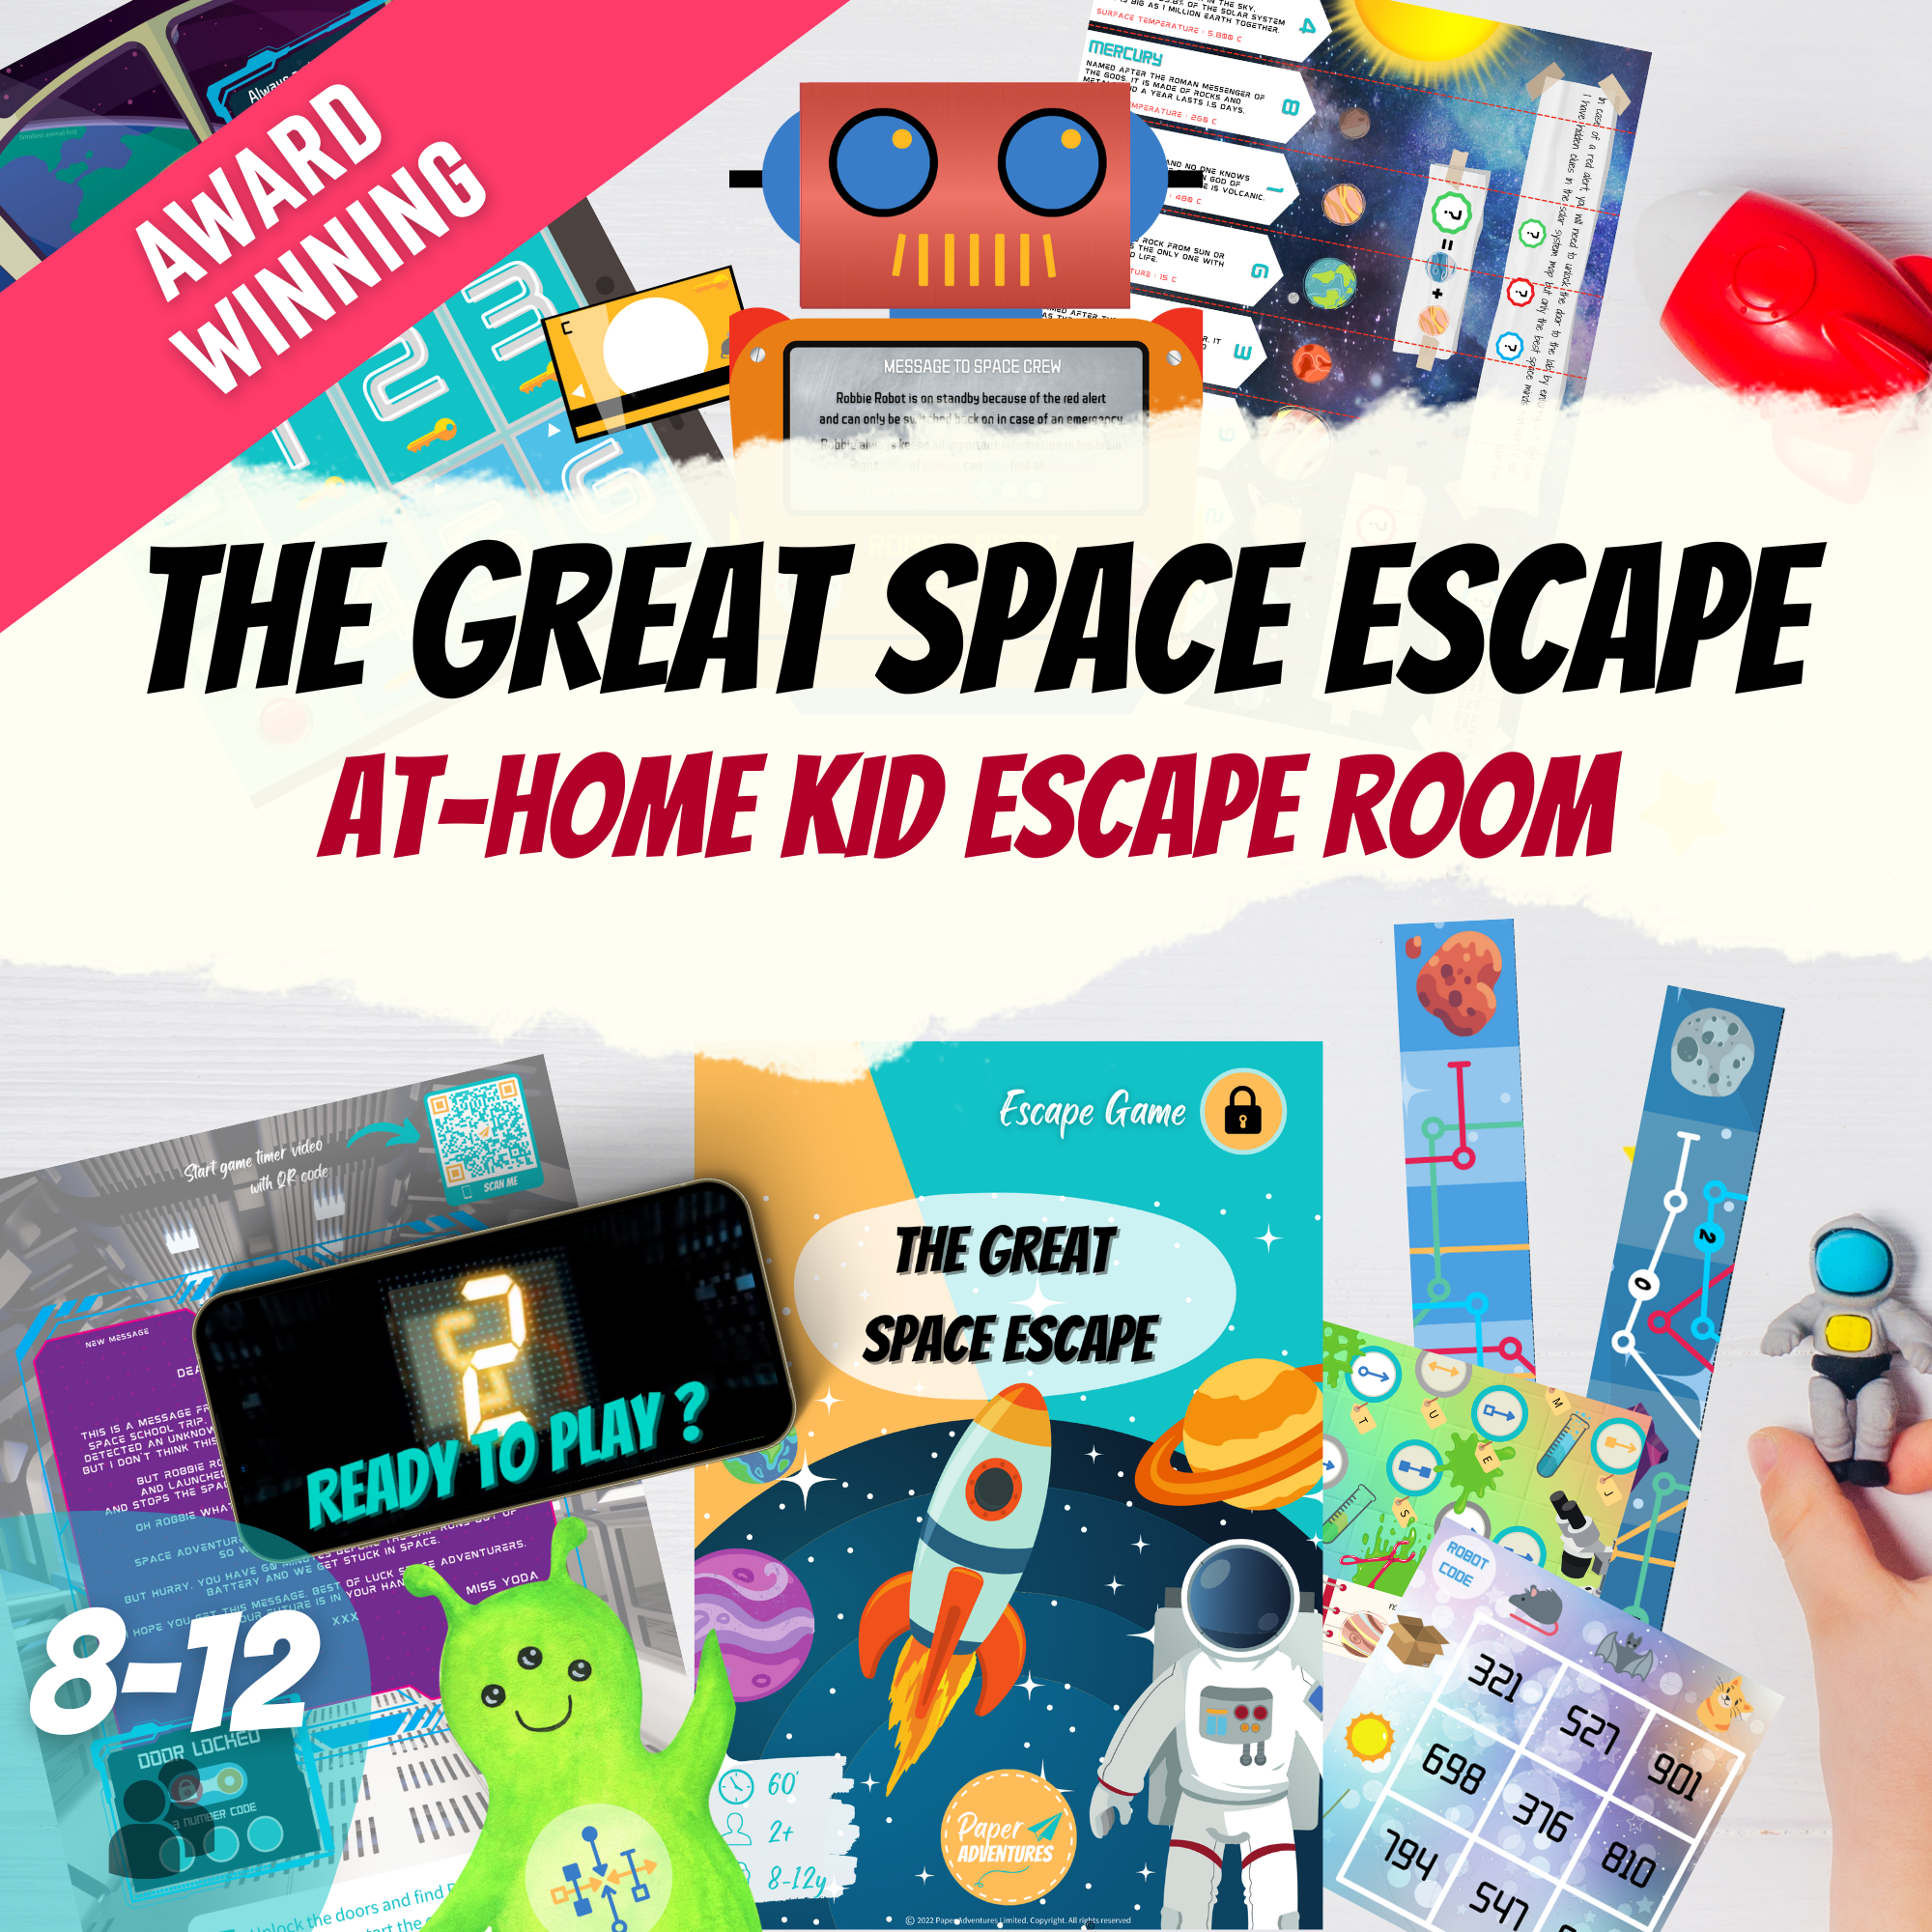 Escape Room Game kit for kids perfect for children birthday parties : Great Space Escape. Home family galaxy and star themed activity - cover